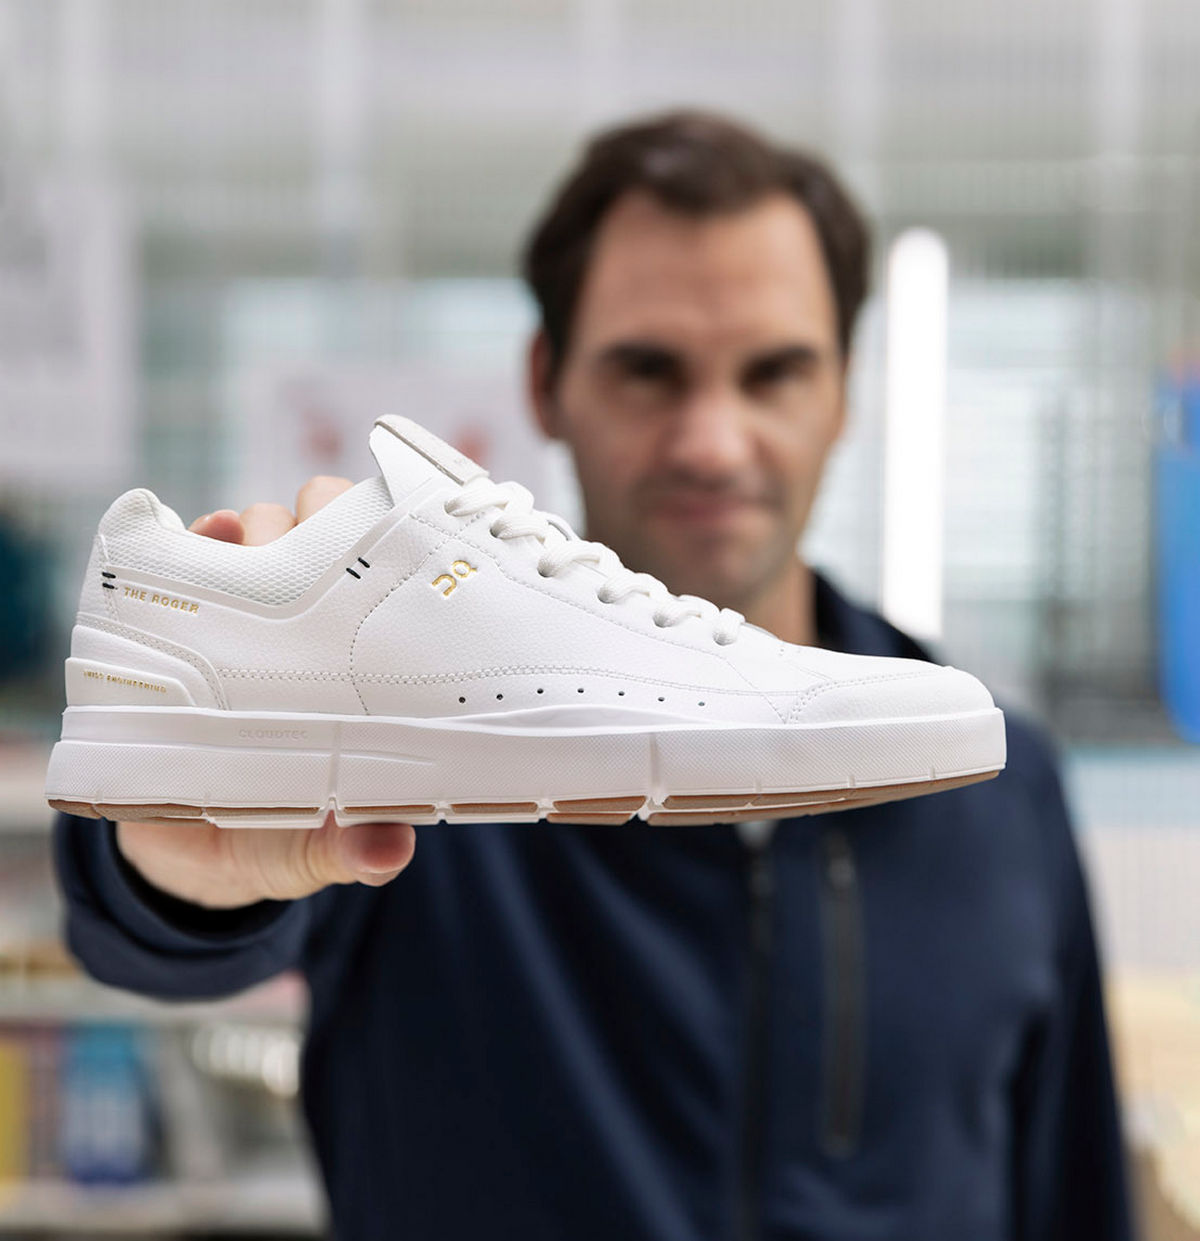 Roger Federer has launched an exclusive tennis-inspired sneaker in